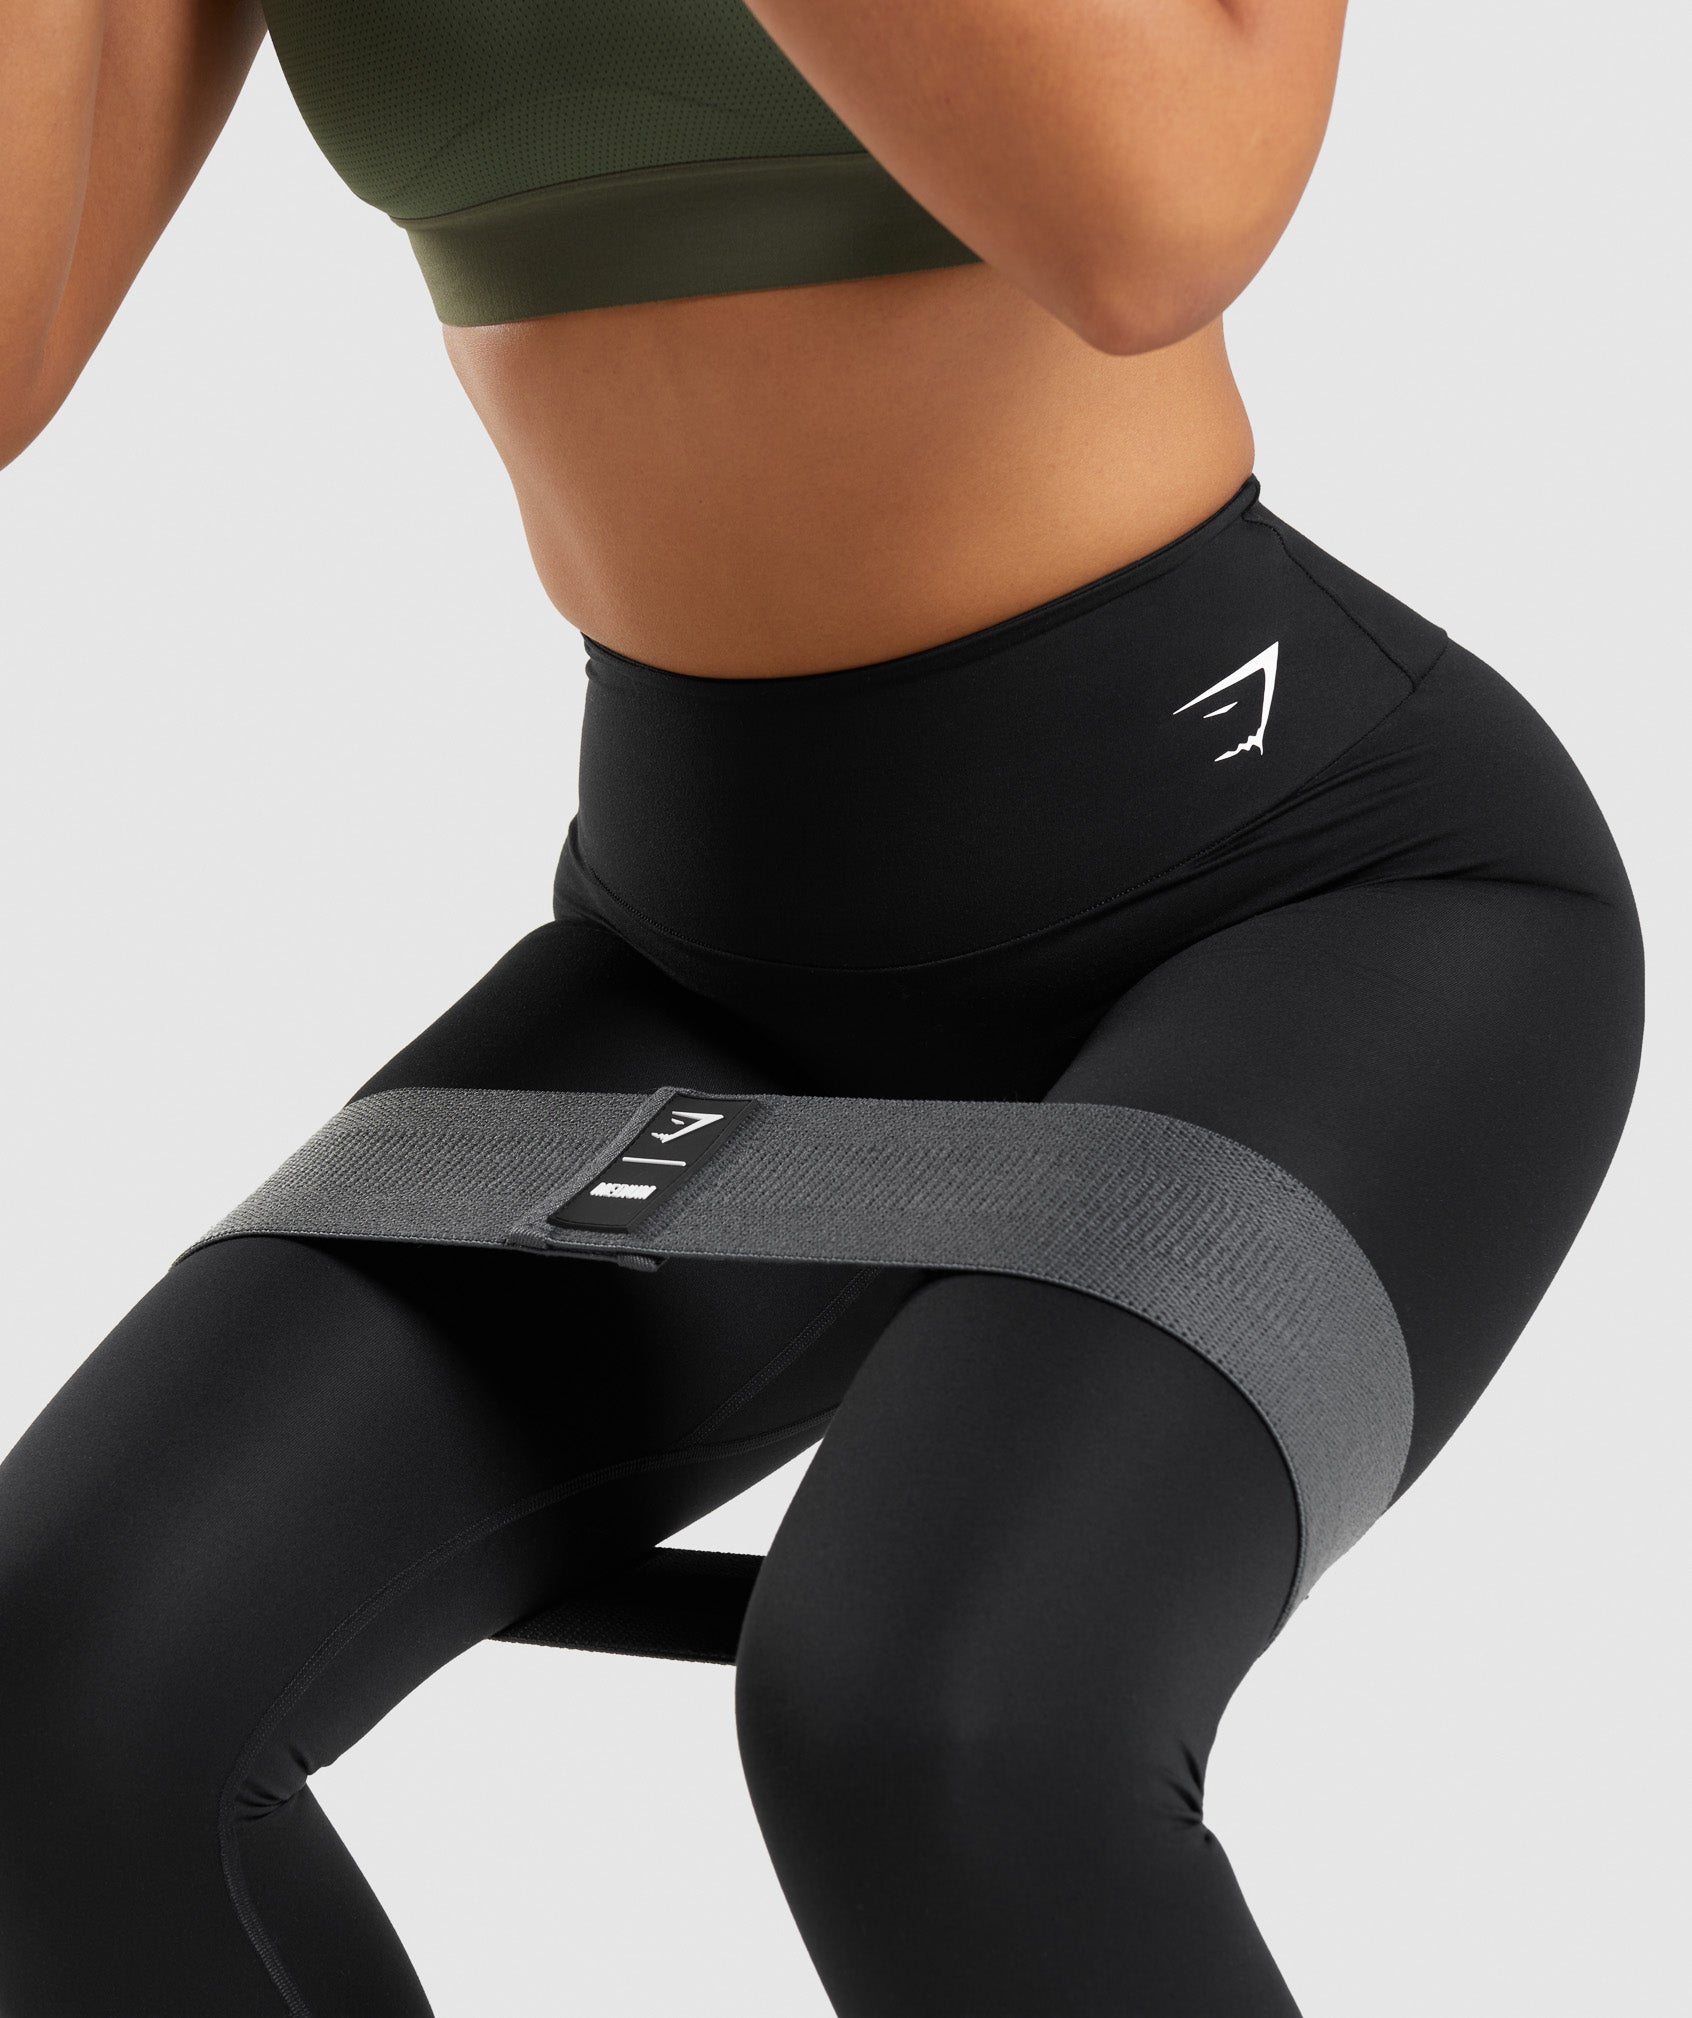 Medium Glute Band in Charcoal Grey - view 2